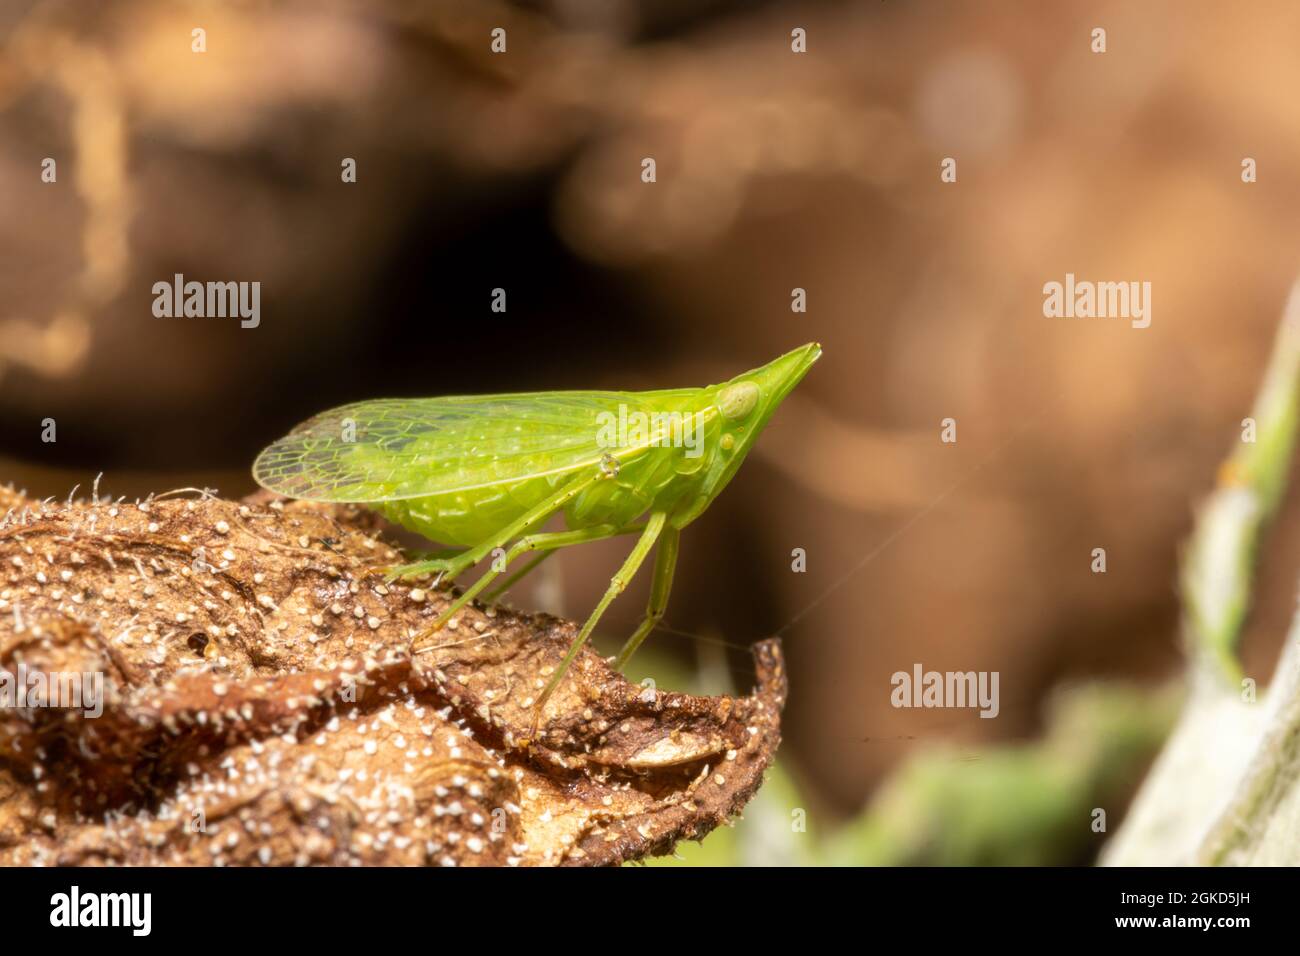 Small green cicada Dictyophara europaea, lantern bearer on a brown leaf against a brown background Stock Photo